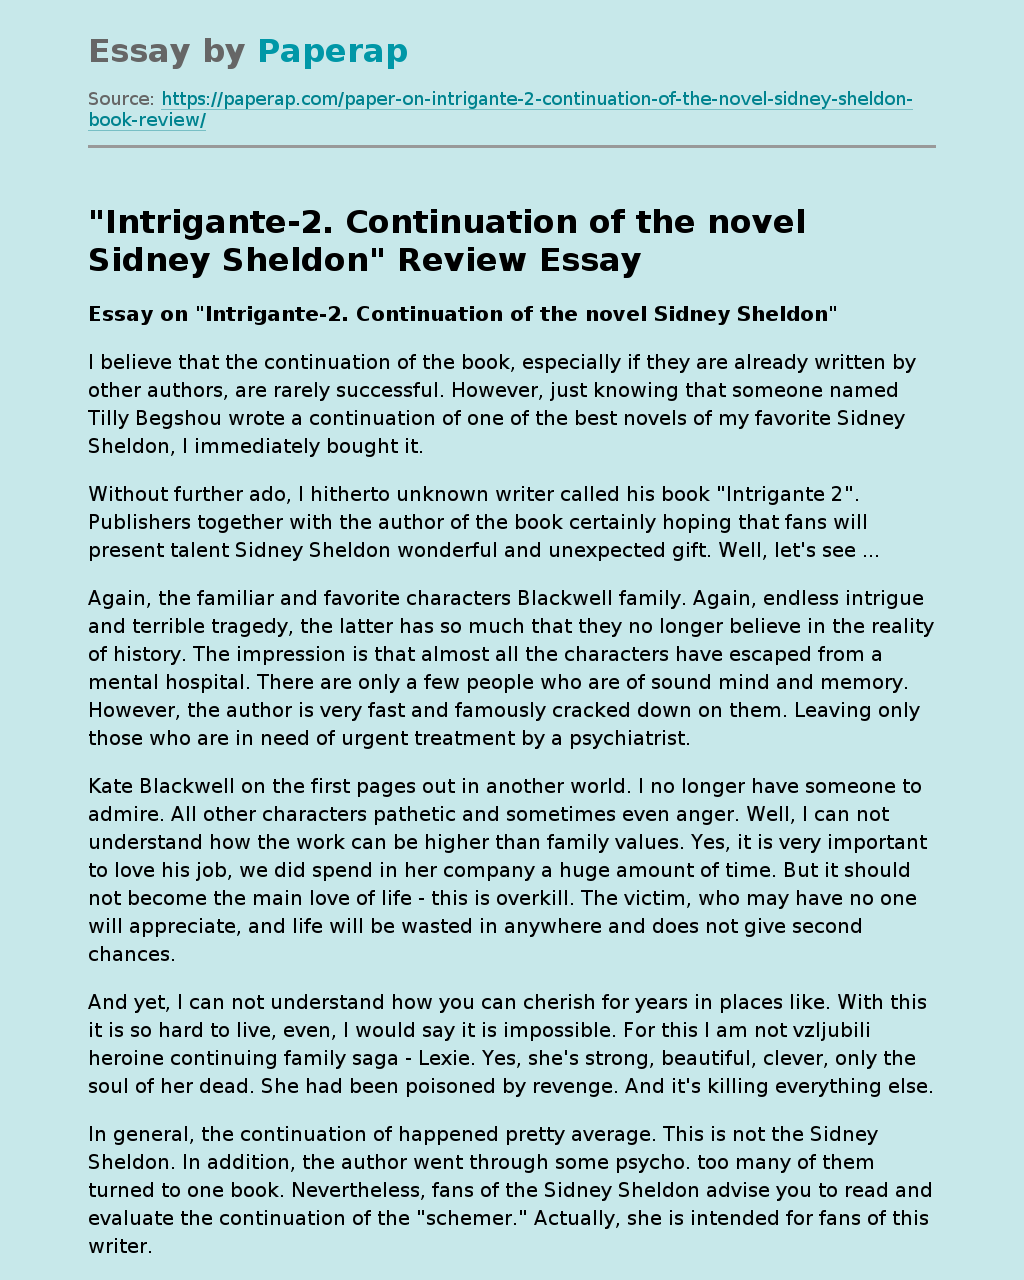 "Intrigante-2. Continuation of the novel Sidney Sheldon" Review